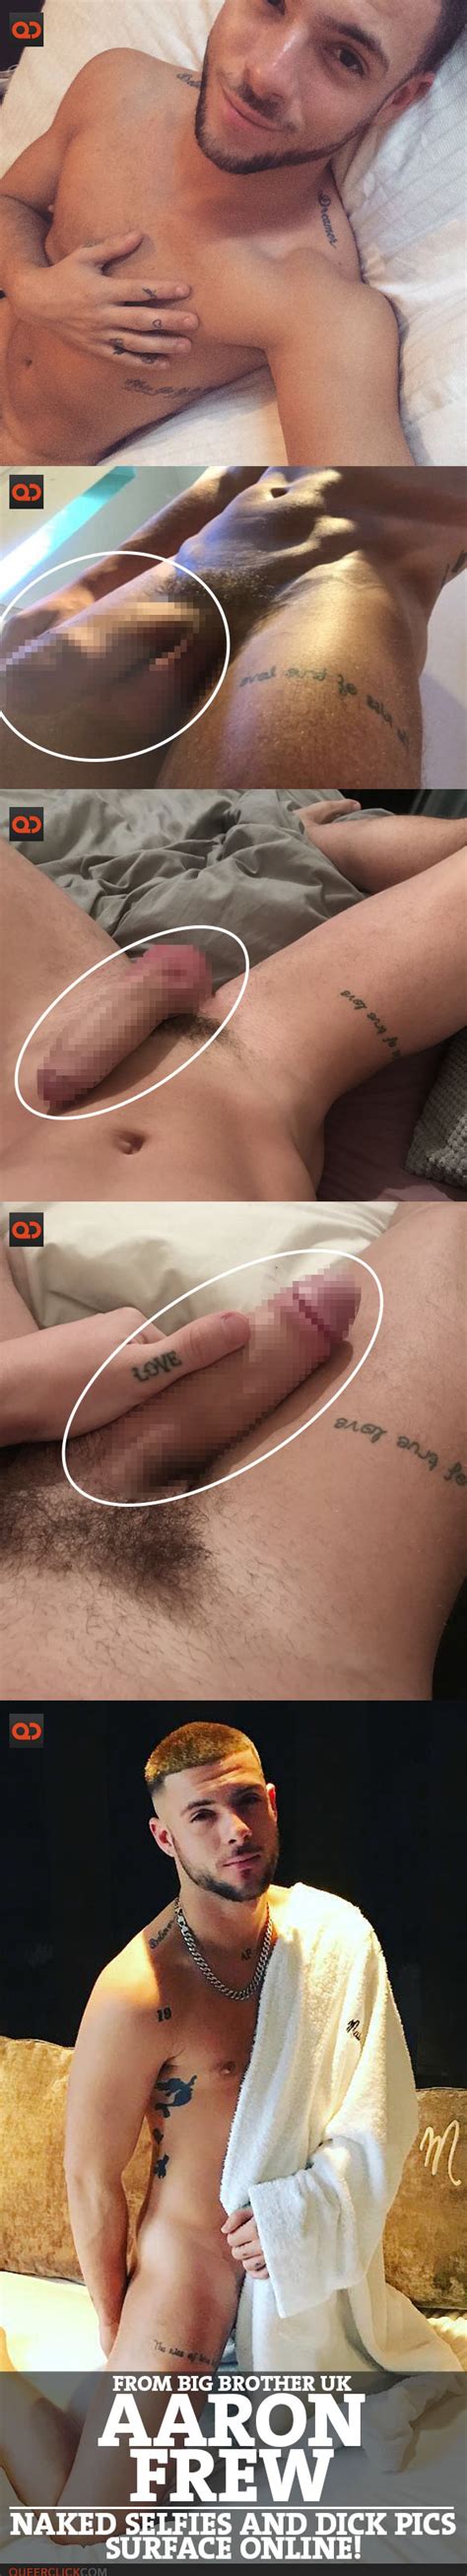 aaron frew from big brother uk naked selfies and dick pics surface online queerclick